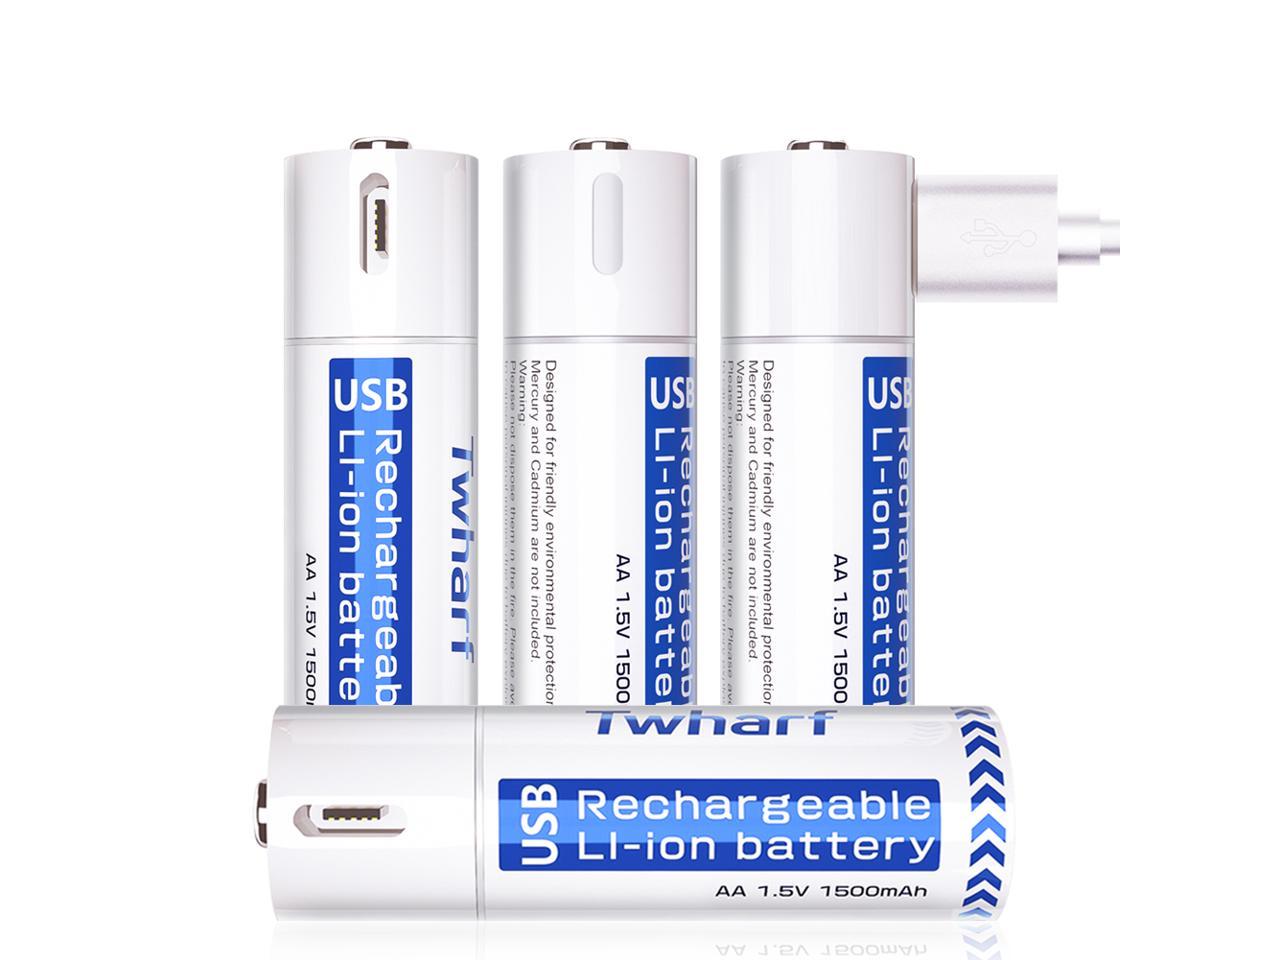 4 X USB RECHARGEABLE AA MN1500 NI-MH BATTERIES INC TWIN MICRO USB CHARGER CABLE 